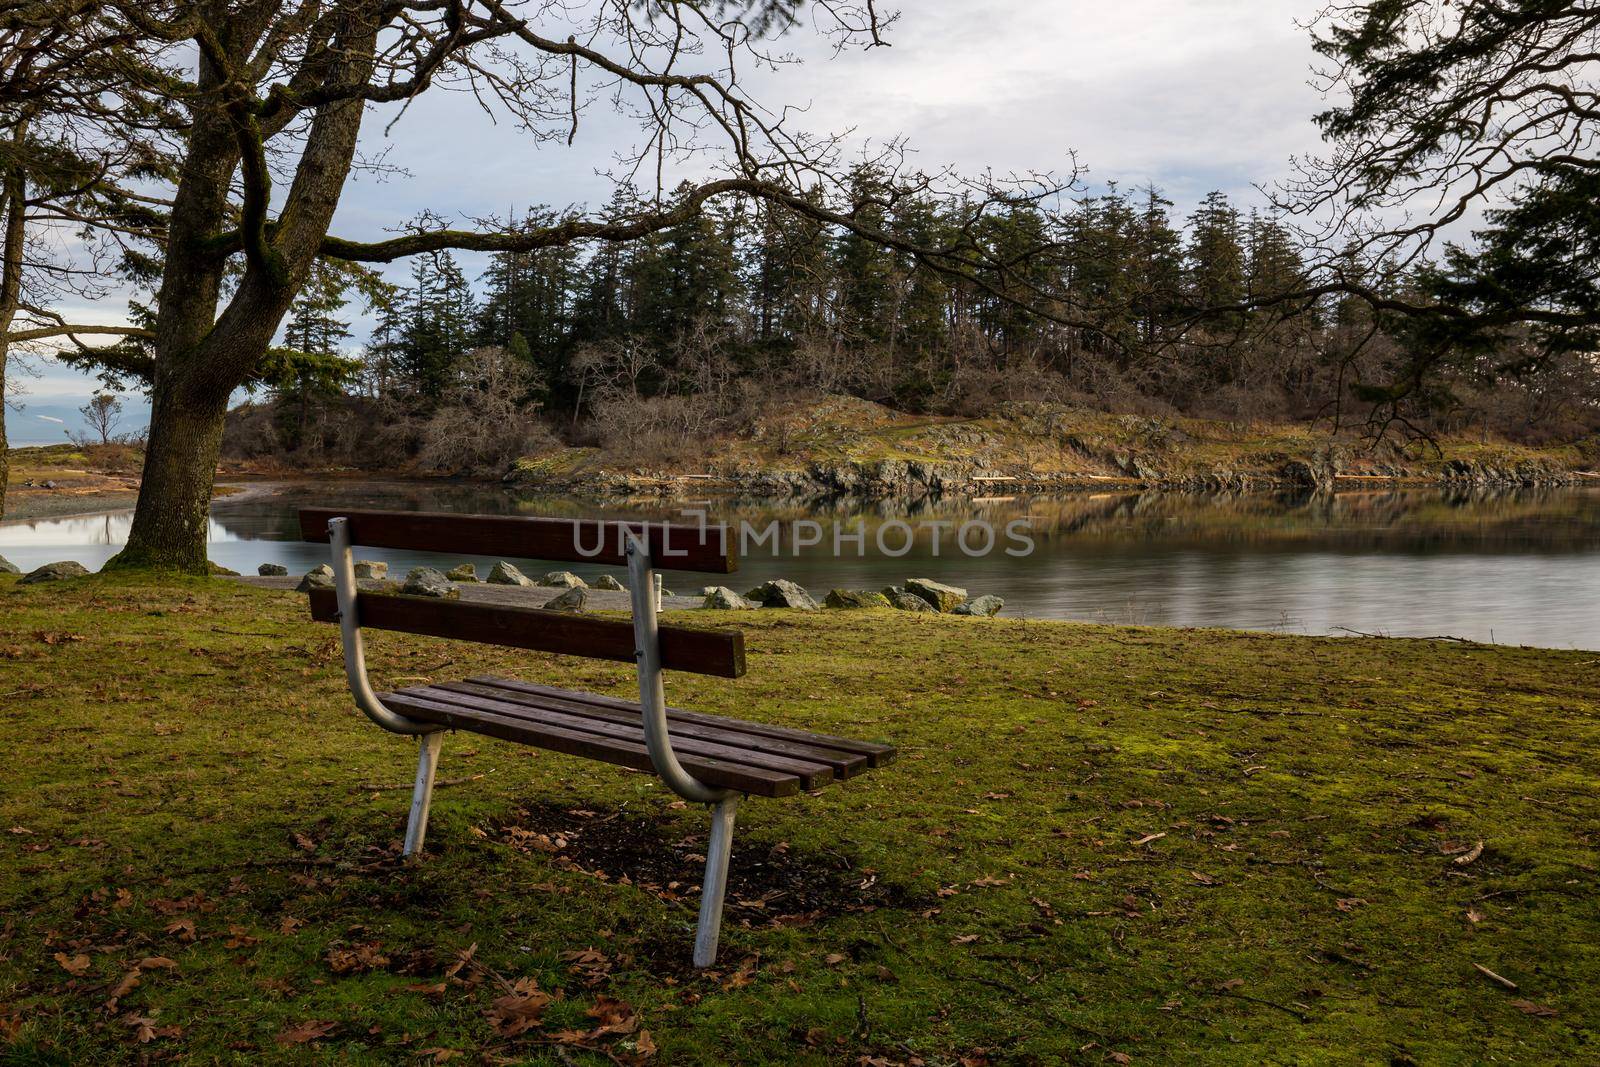 Bench in the nature surrounded by trees with a beautiful view. Picture taken in Pipers Lagoon Park, Nanaimo, Vancouver Island, BC, Canada, during a winter morning.